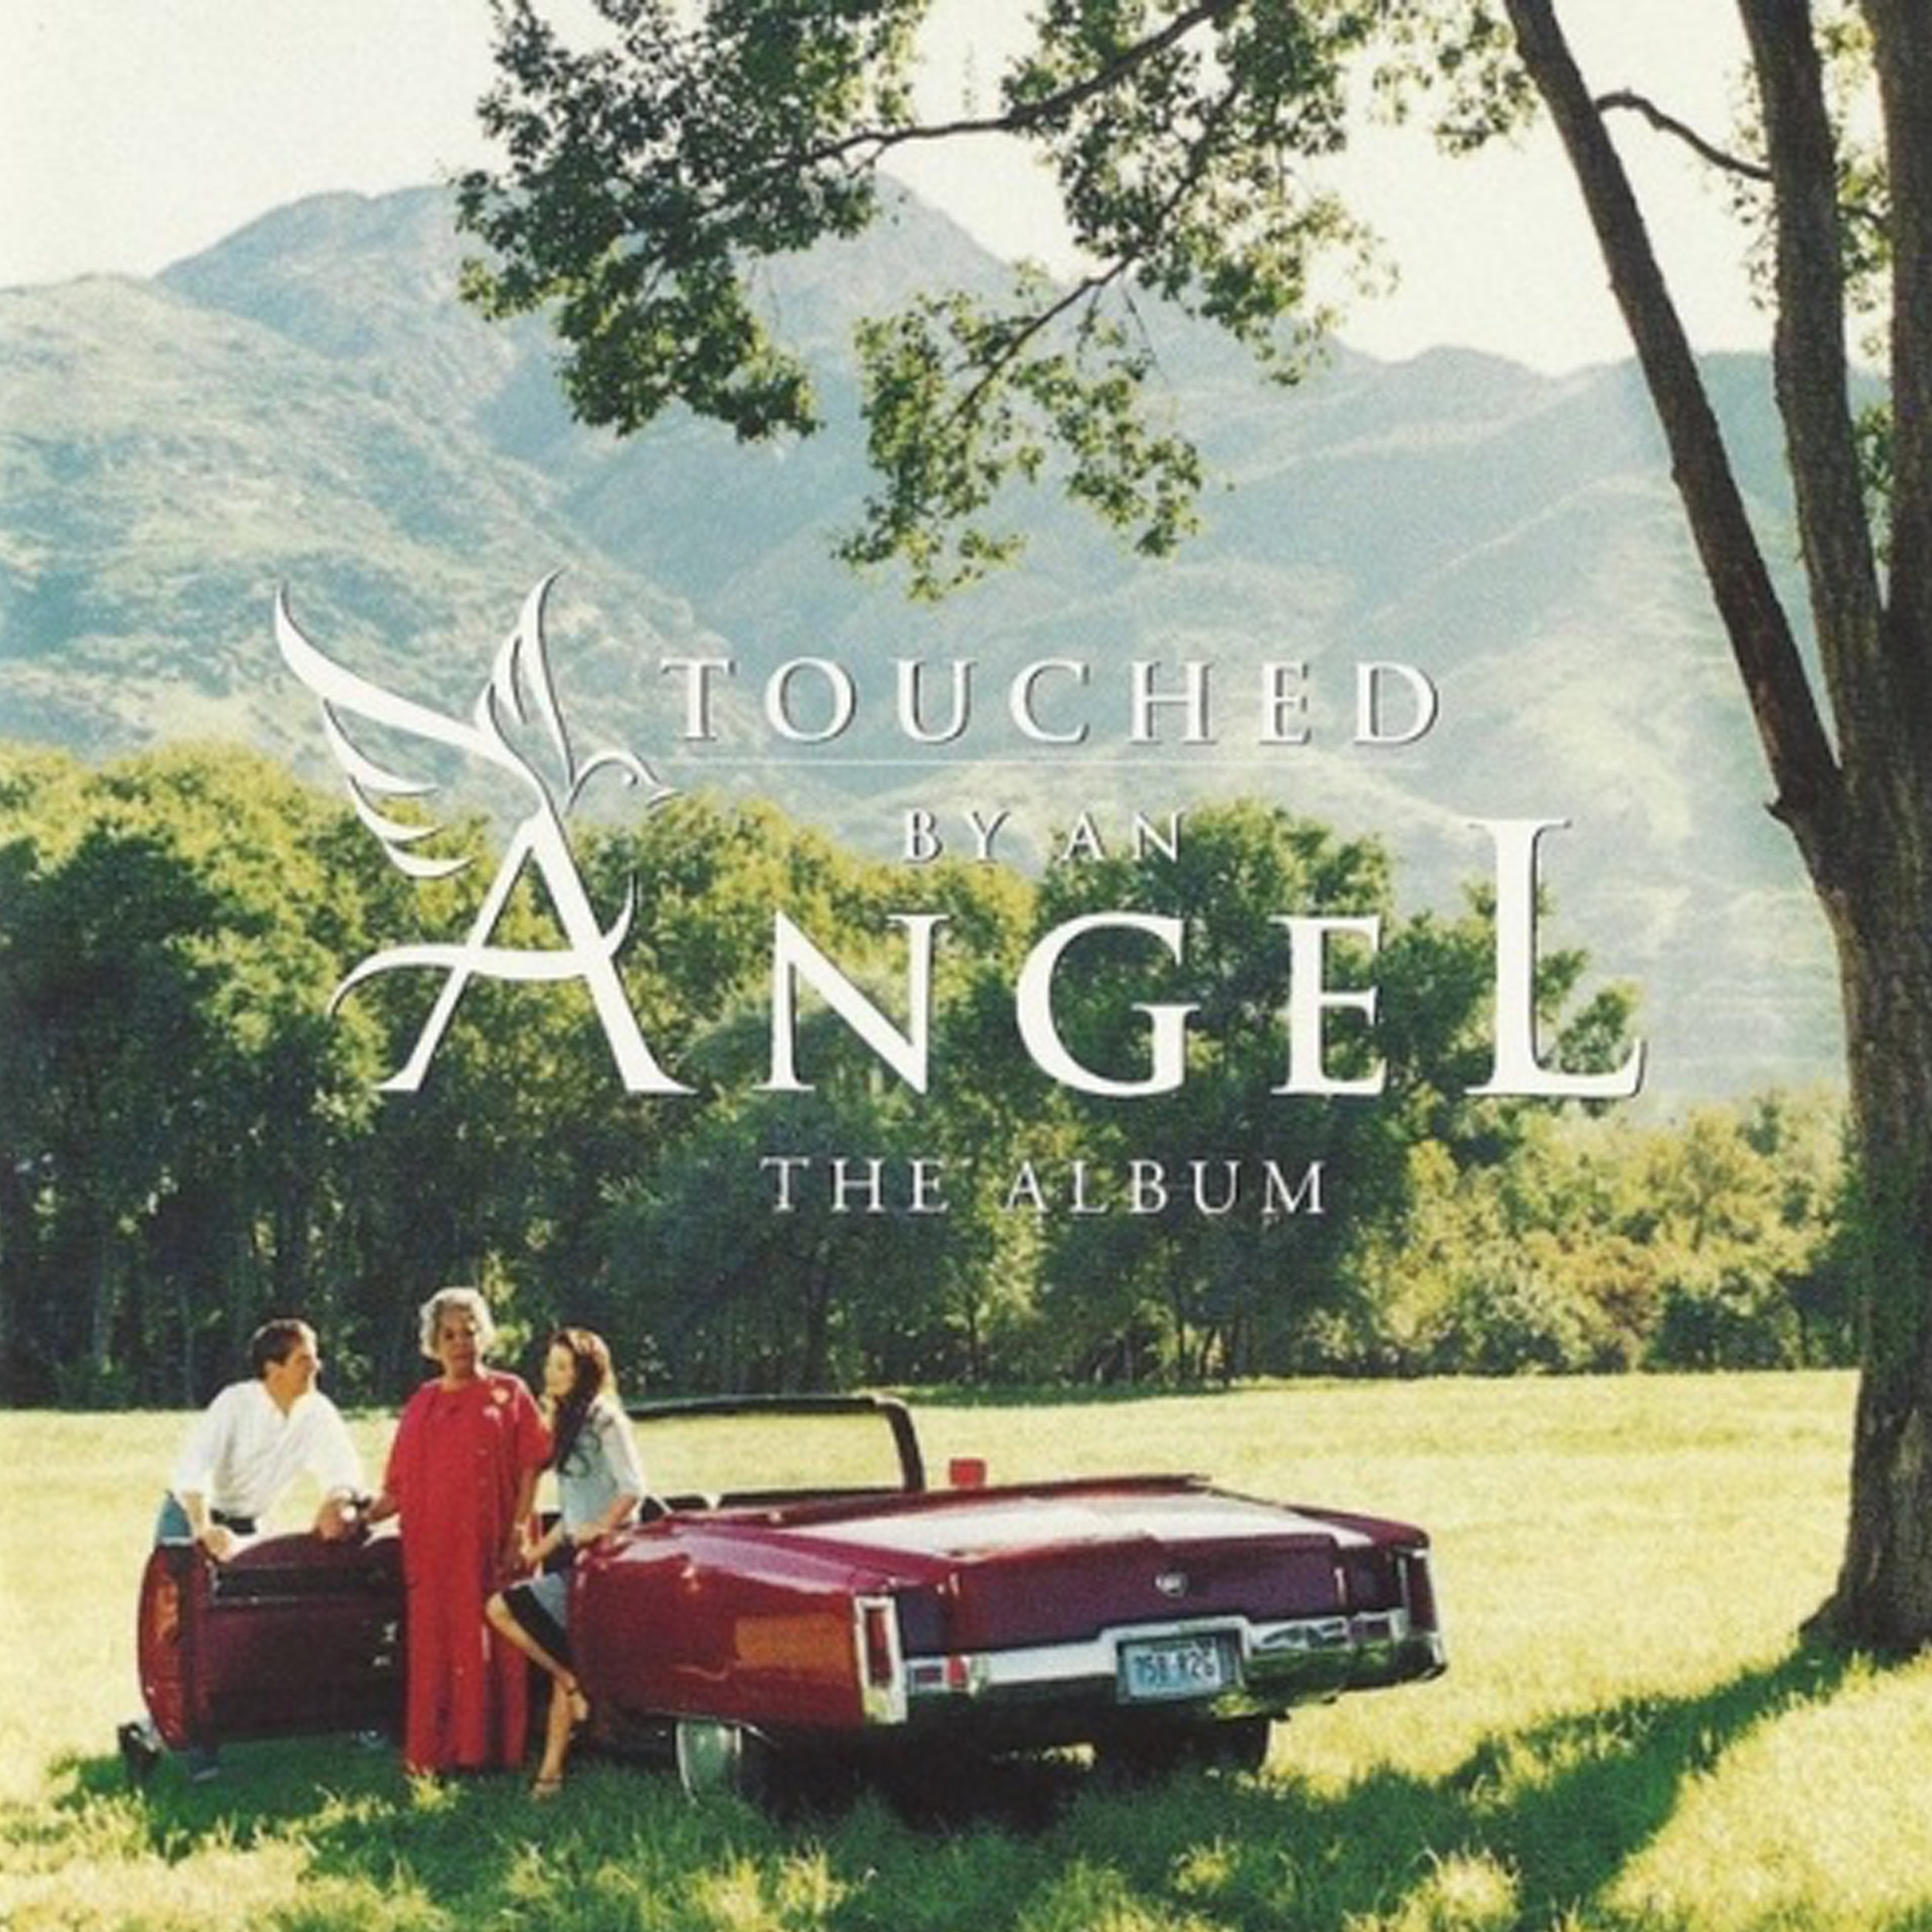 Touched by an angel.jpg